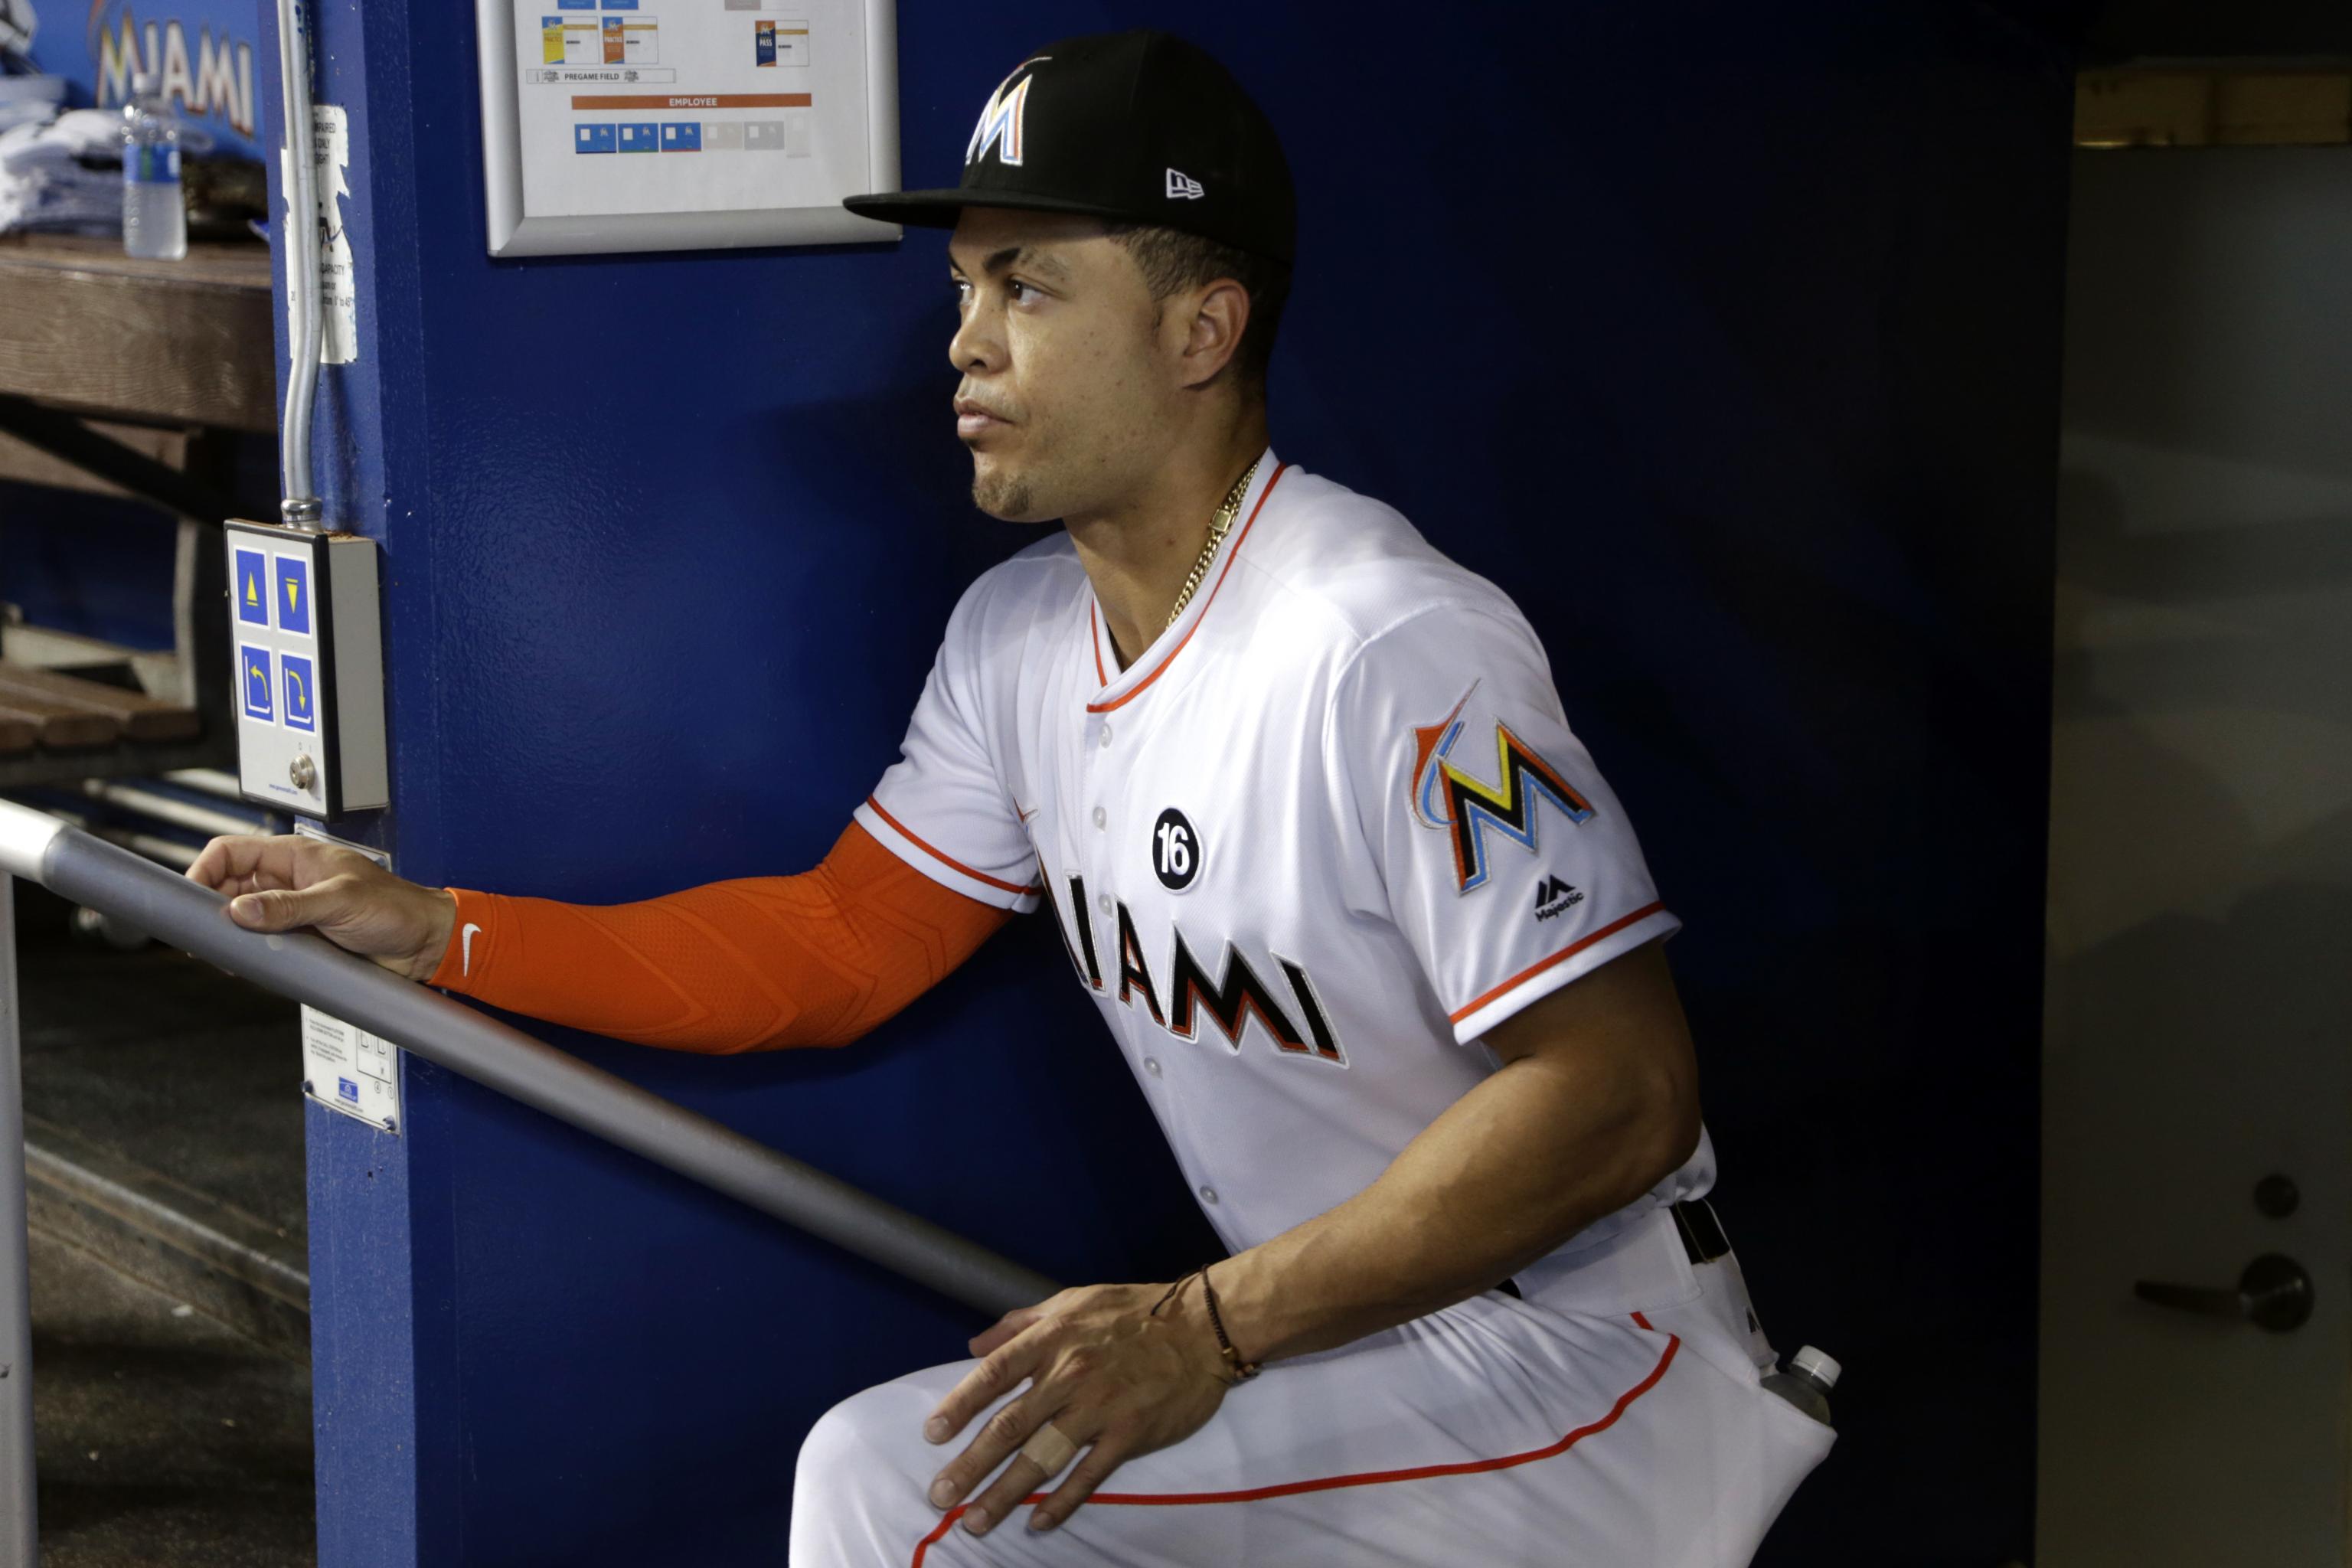 Giancarlo Stanton: Dysfunctional Marlins tenure ends in acrimony